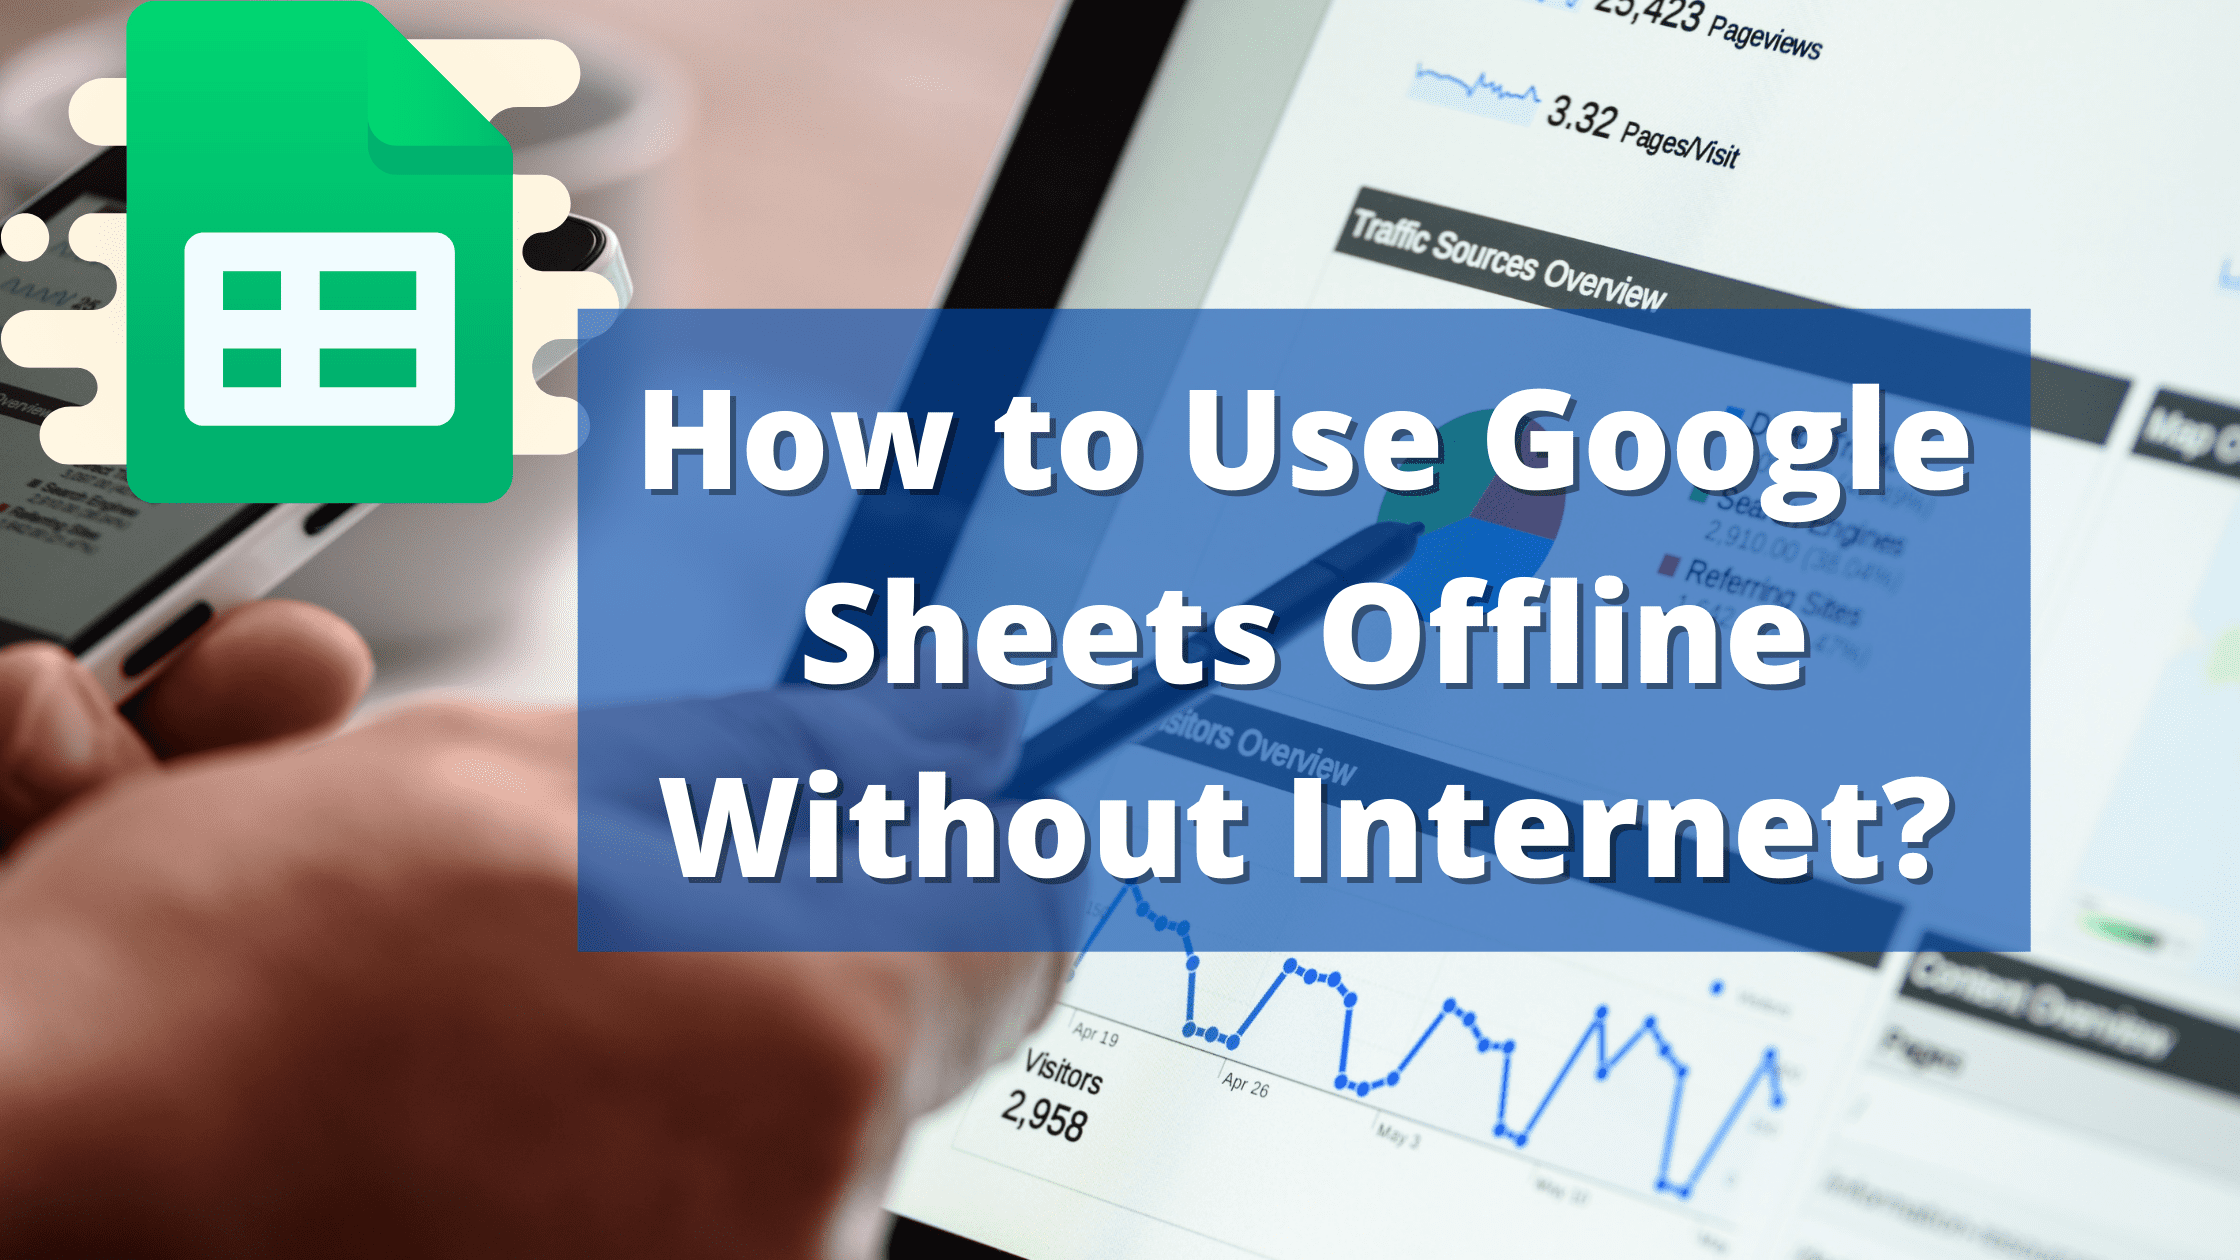 How to Use Google Sheets Offline Without Internet?